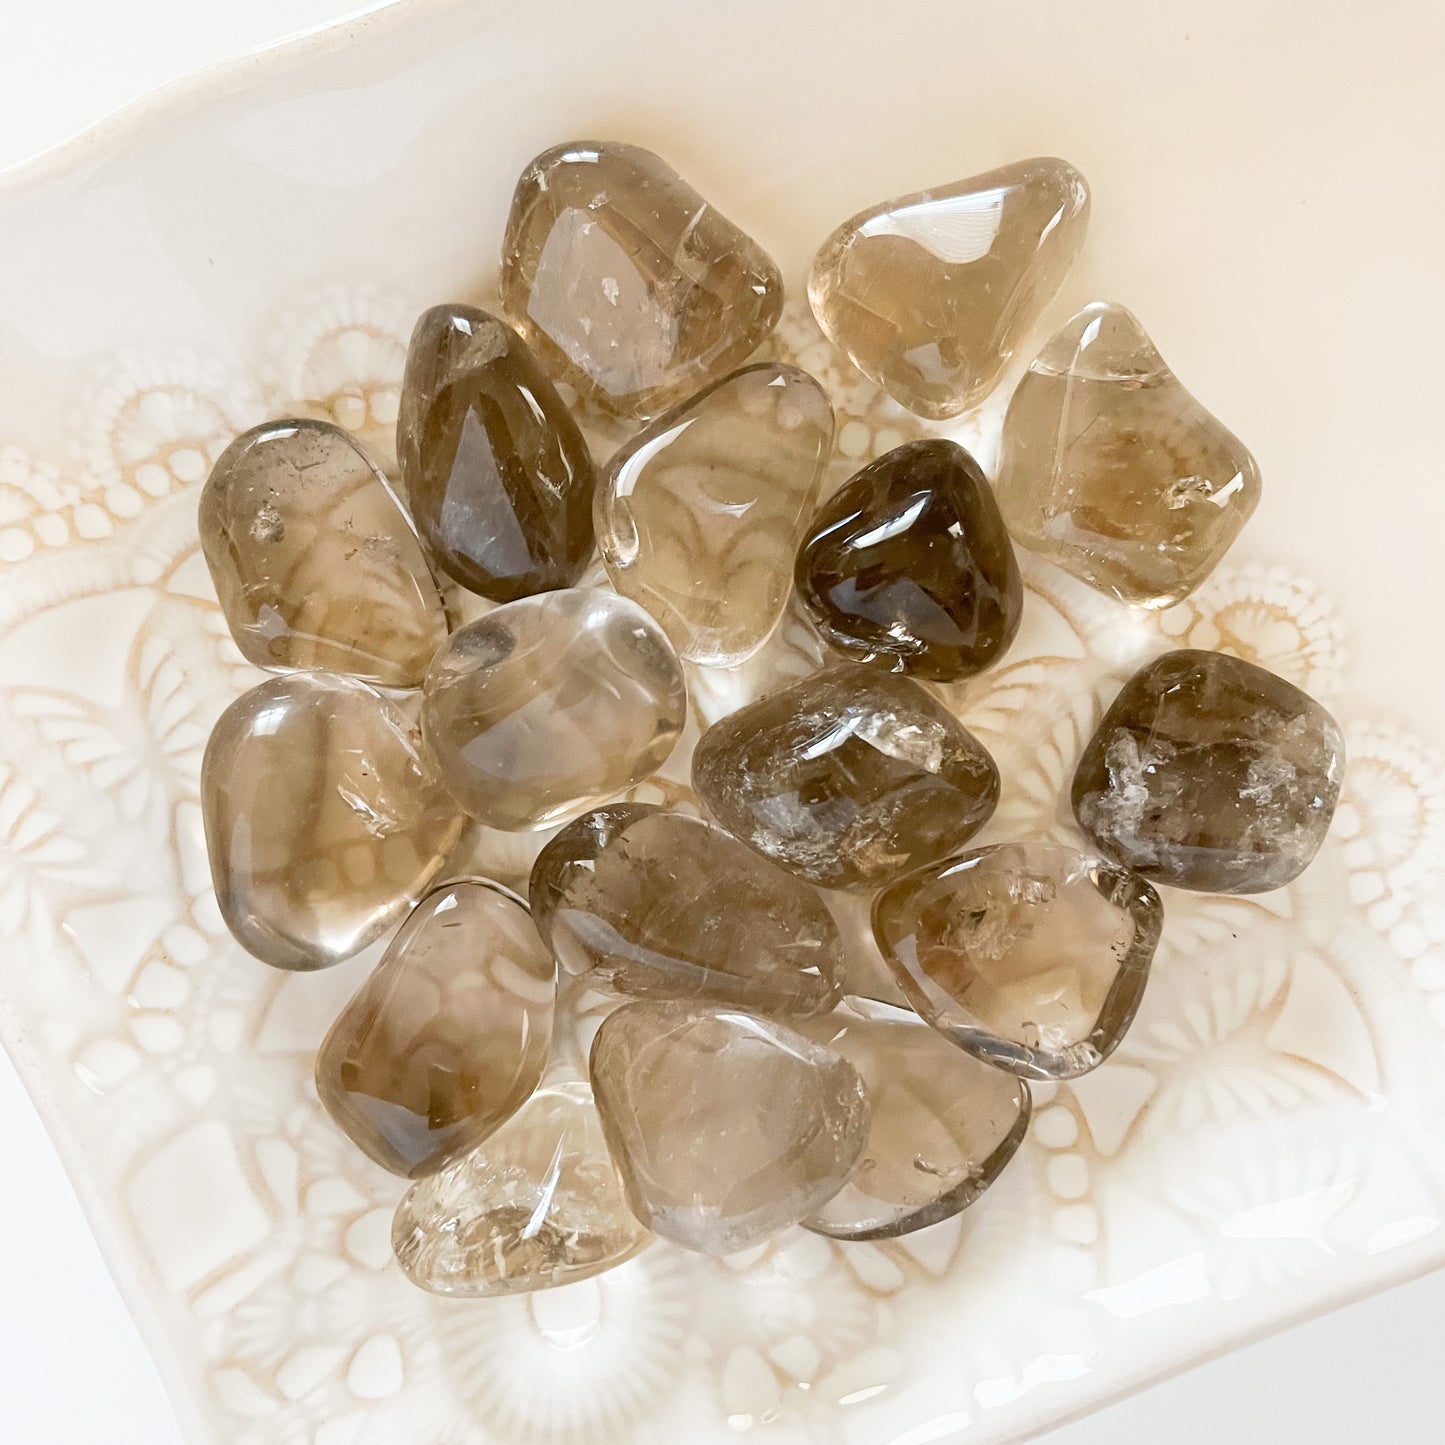 Smoky Quartz Tumbled Crystal with complementary keepsake information card